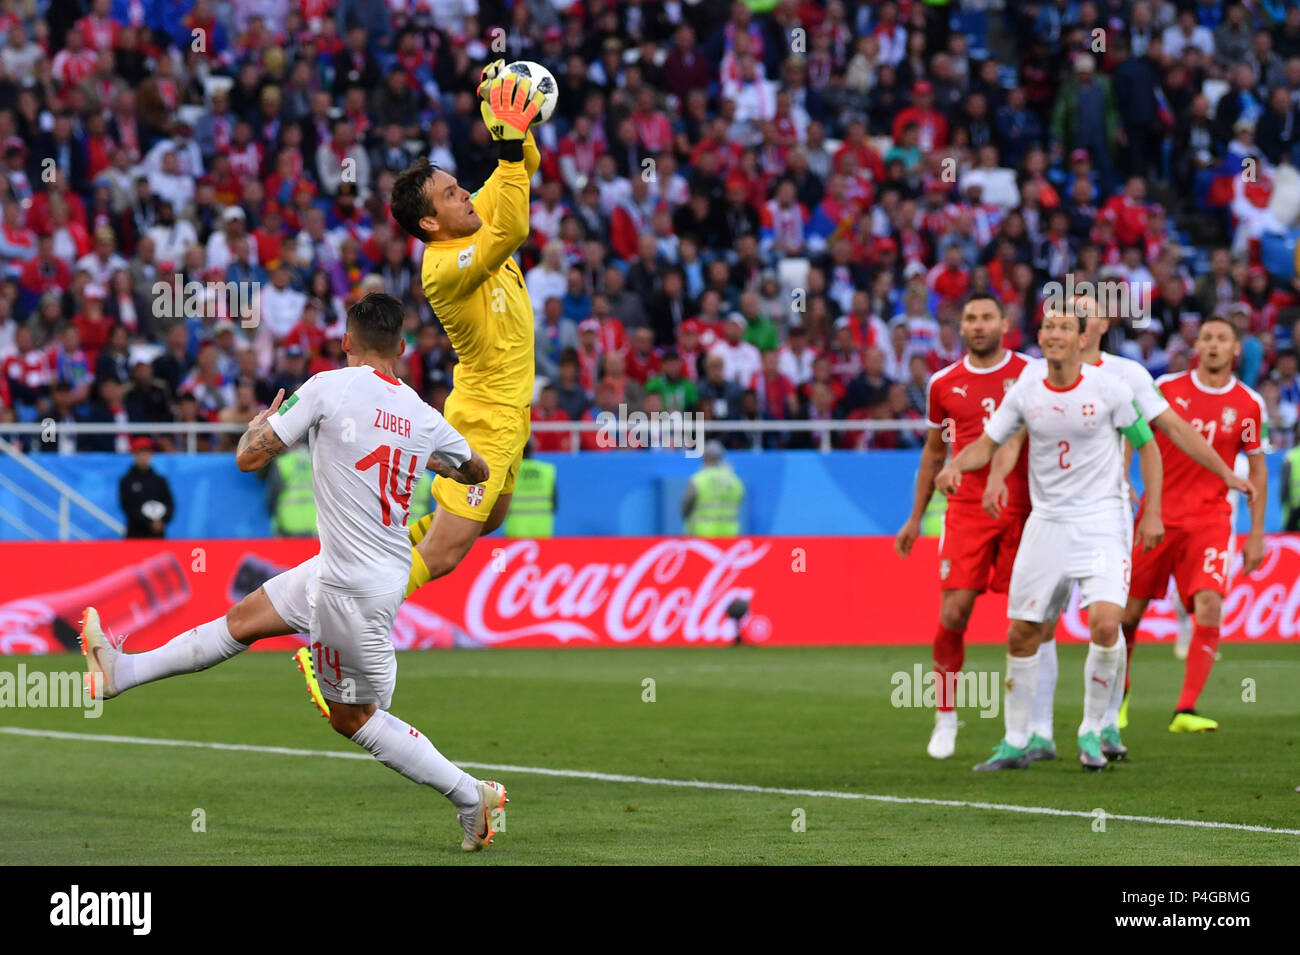 Kaliningrad, Russia. 22nd June, 2018. Serbia's goalkeeper Vladimir Stojkovic (2nd L) defends during the 2018 FIFA World Cup Group E match between Switzerland and Serbia in Kaliningrad, Russia, June 22, 2018. Credit: Chen Cheng/Xinhua/Alamy Live News Stock Photo